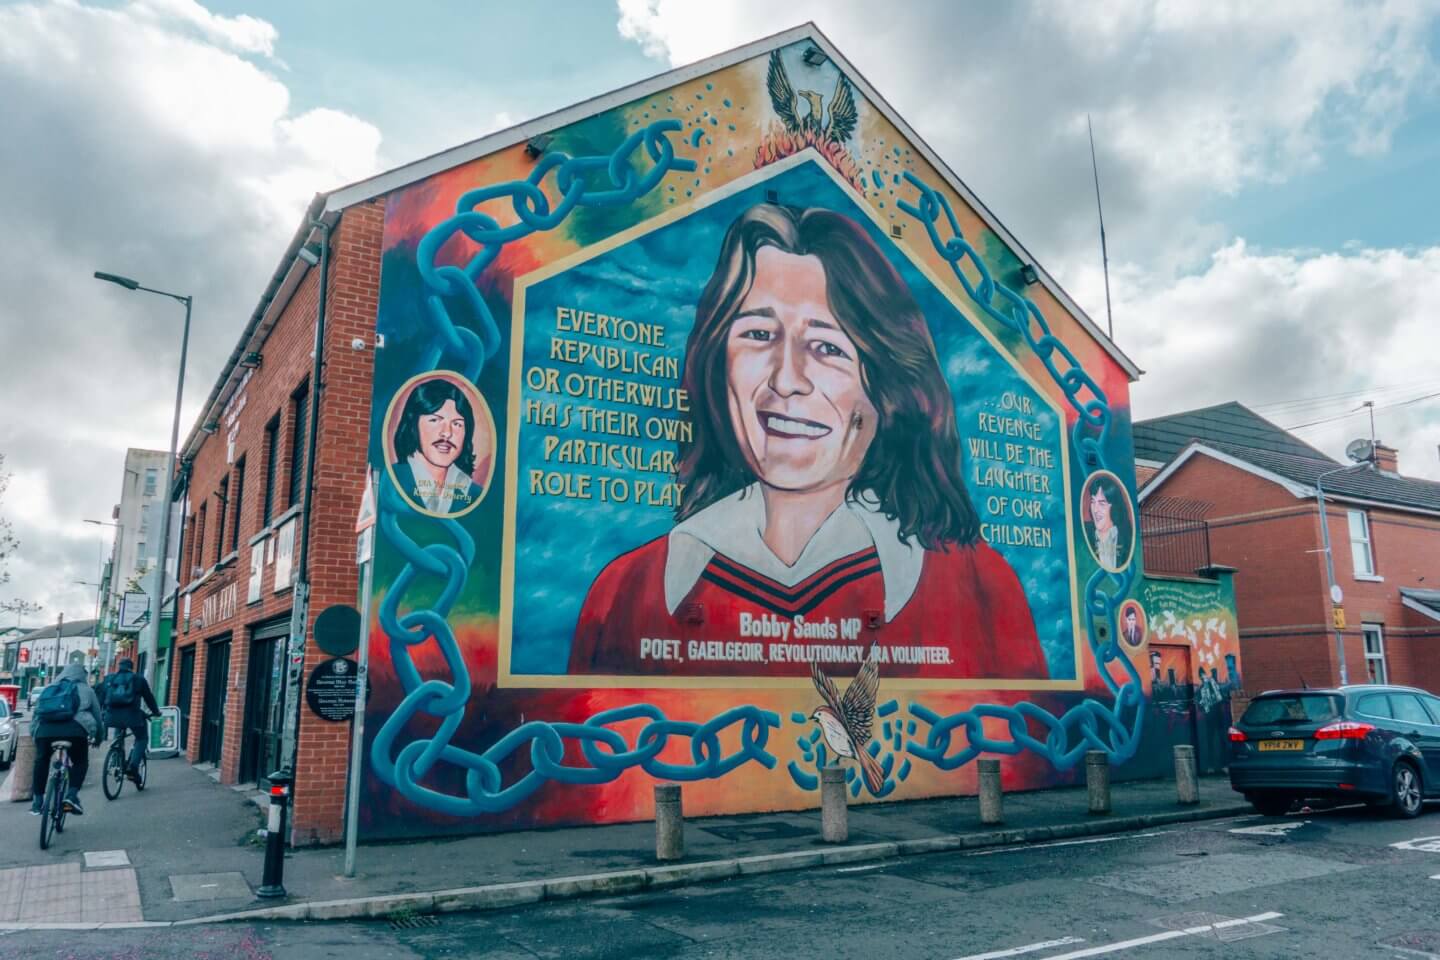 Bobby Sands mural in Belfast, Northern Ireland - places to visit in Ireland